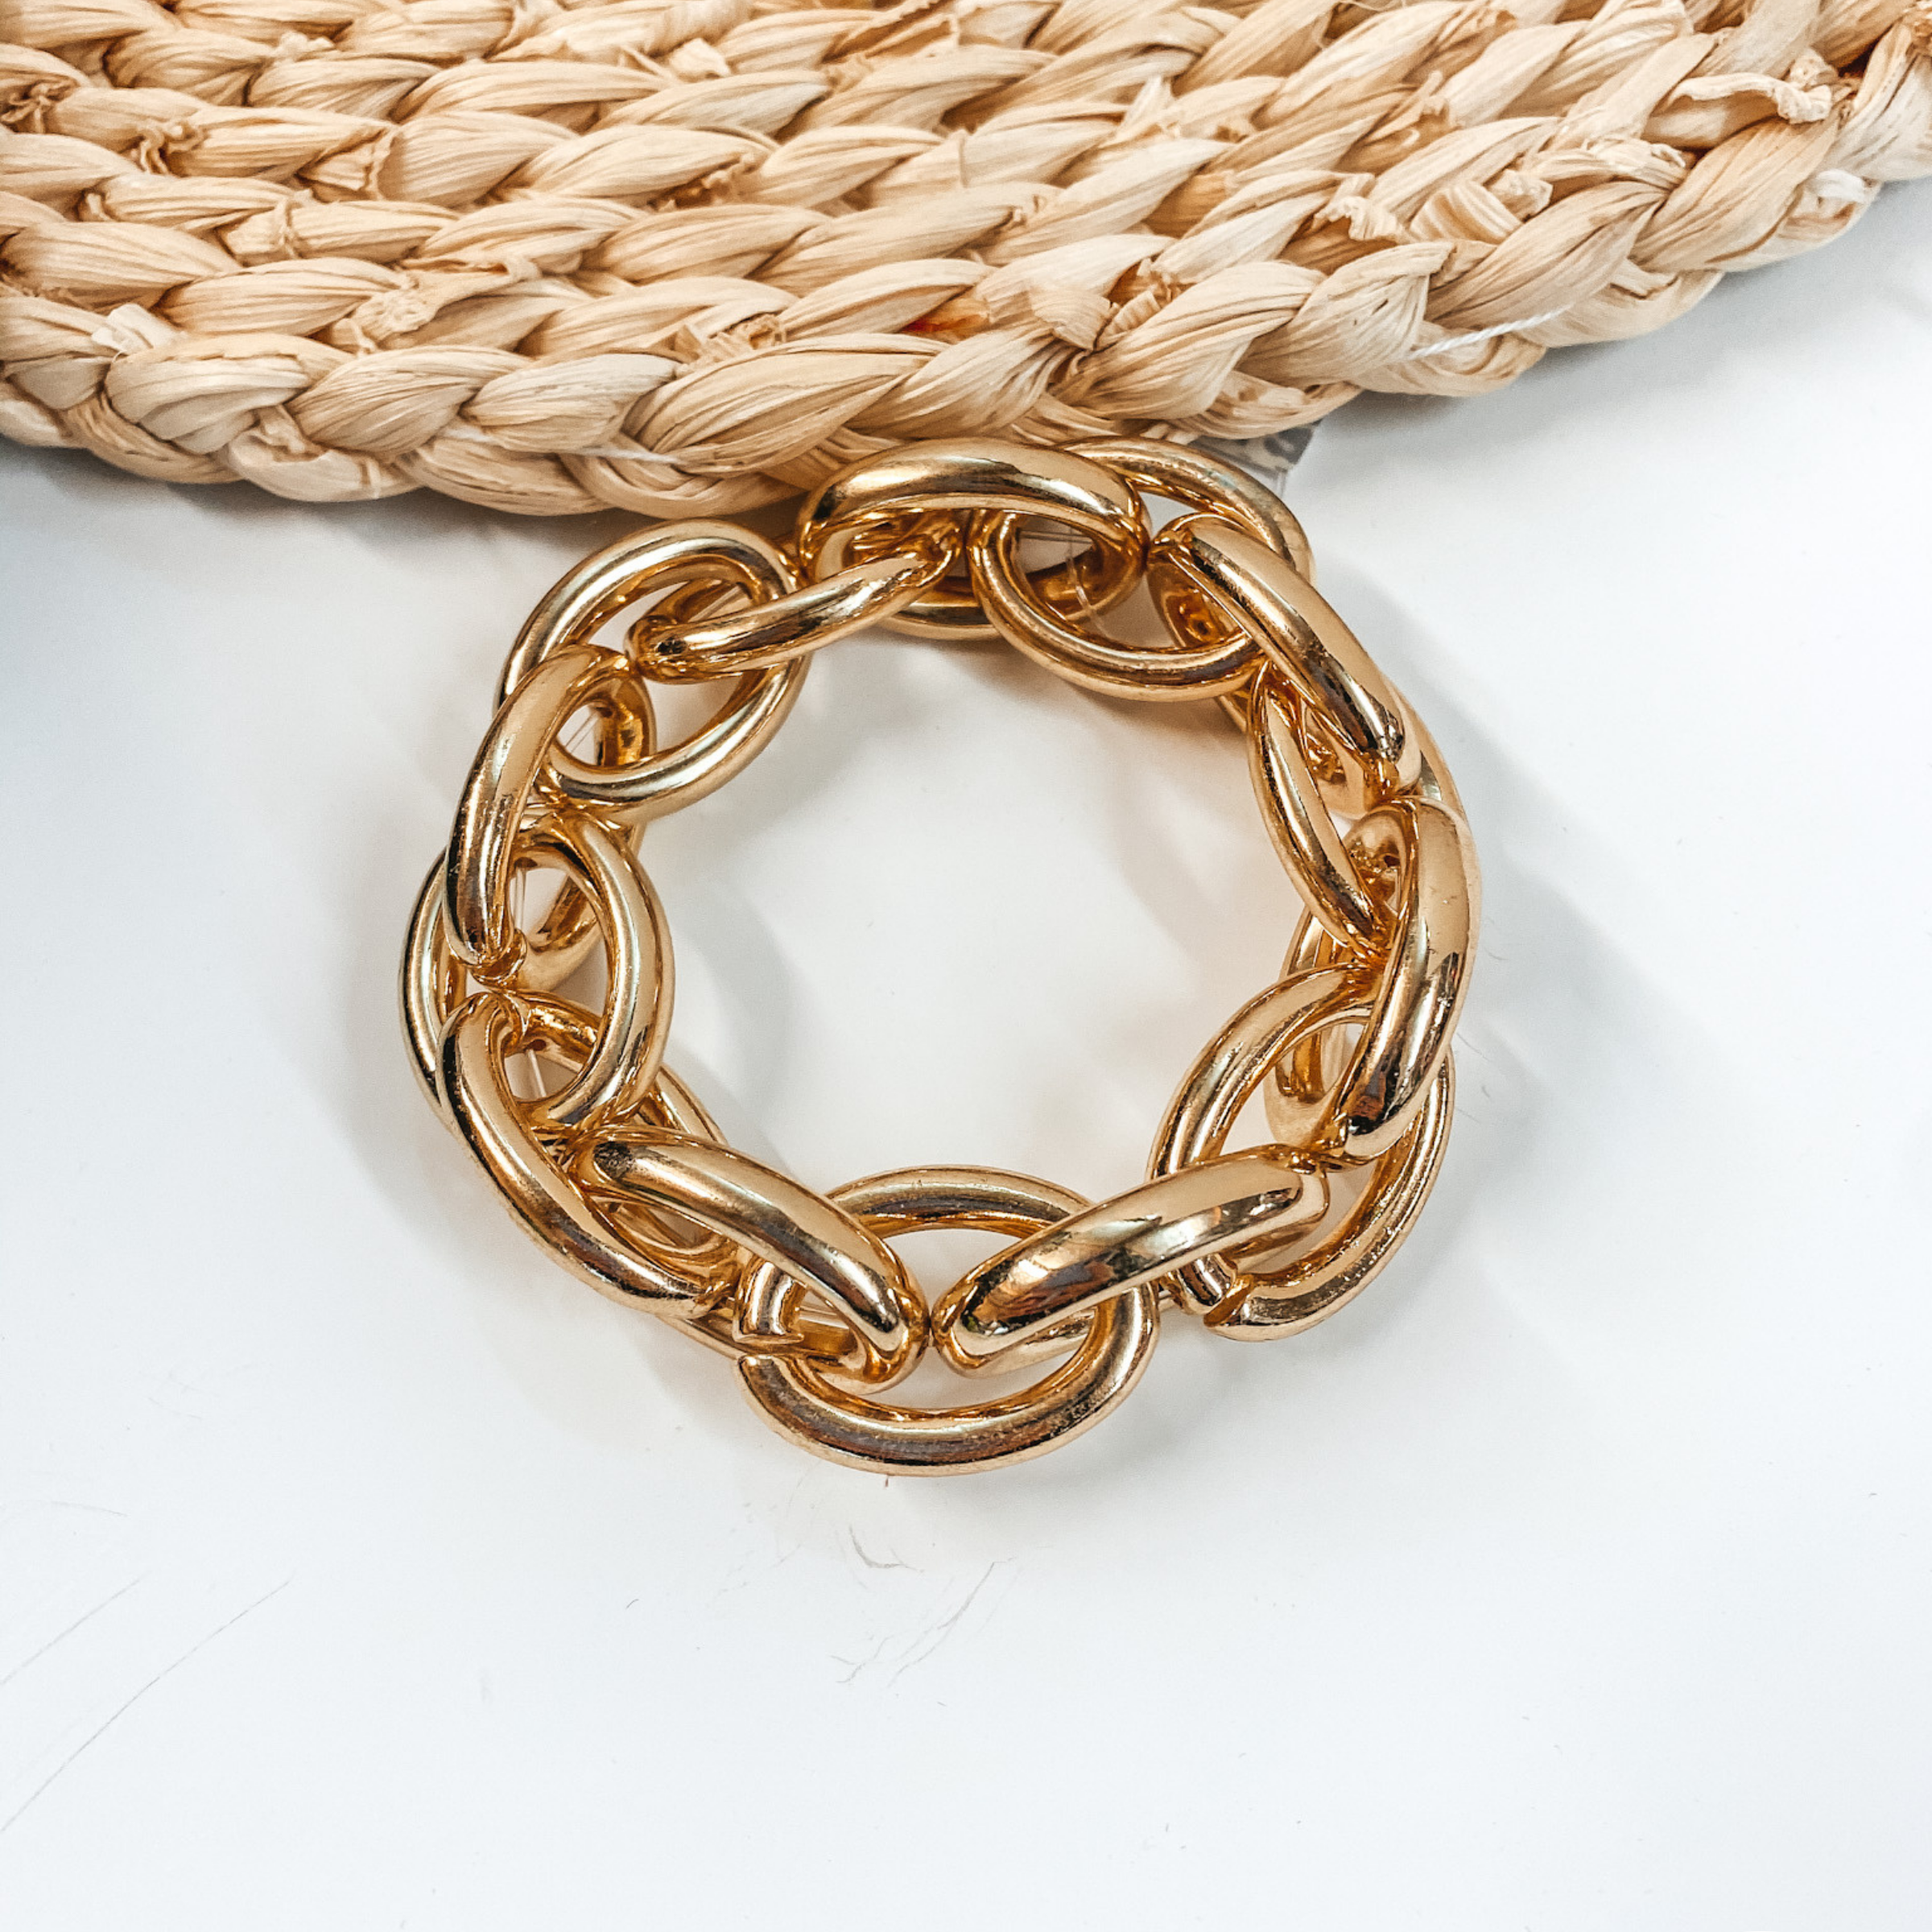 Large Gold Chain Link Stretchy Bracelet - Giddy Up Glamour Boutique